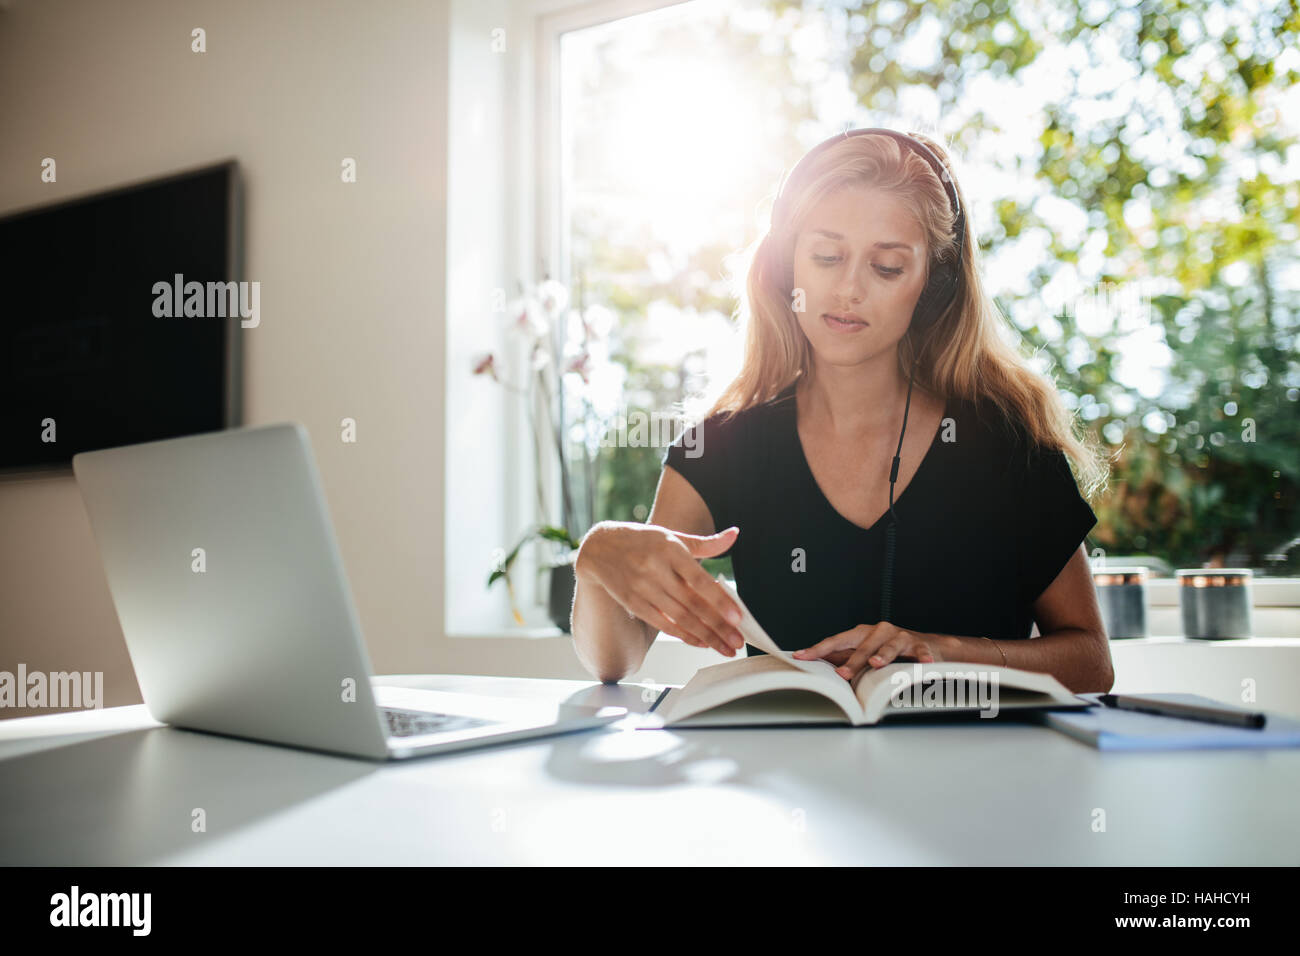 Young woman studying at home. Young woman sitting at table with laptop reading book. Stock Photo